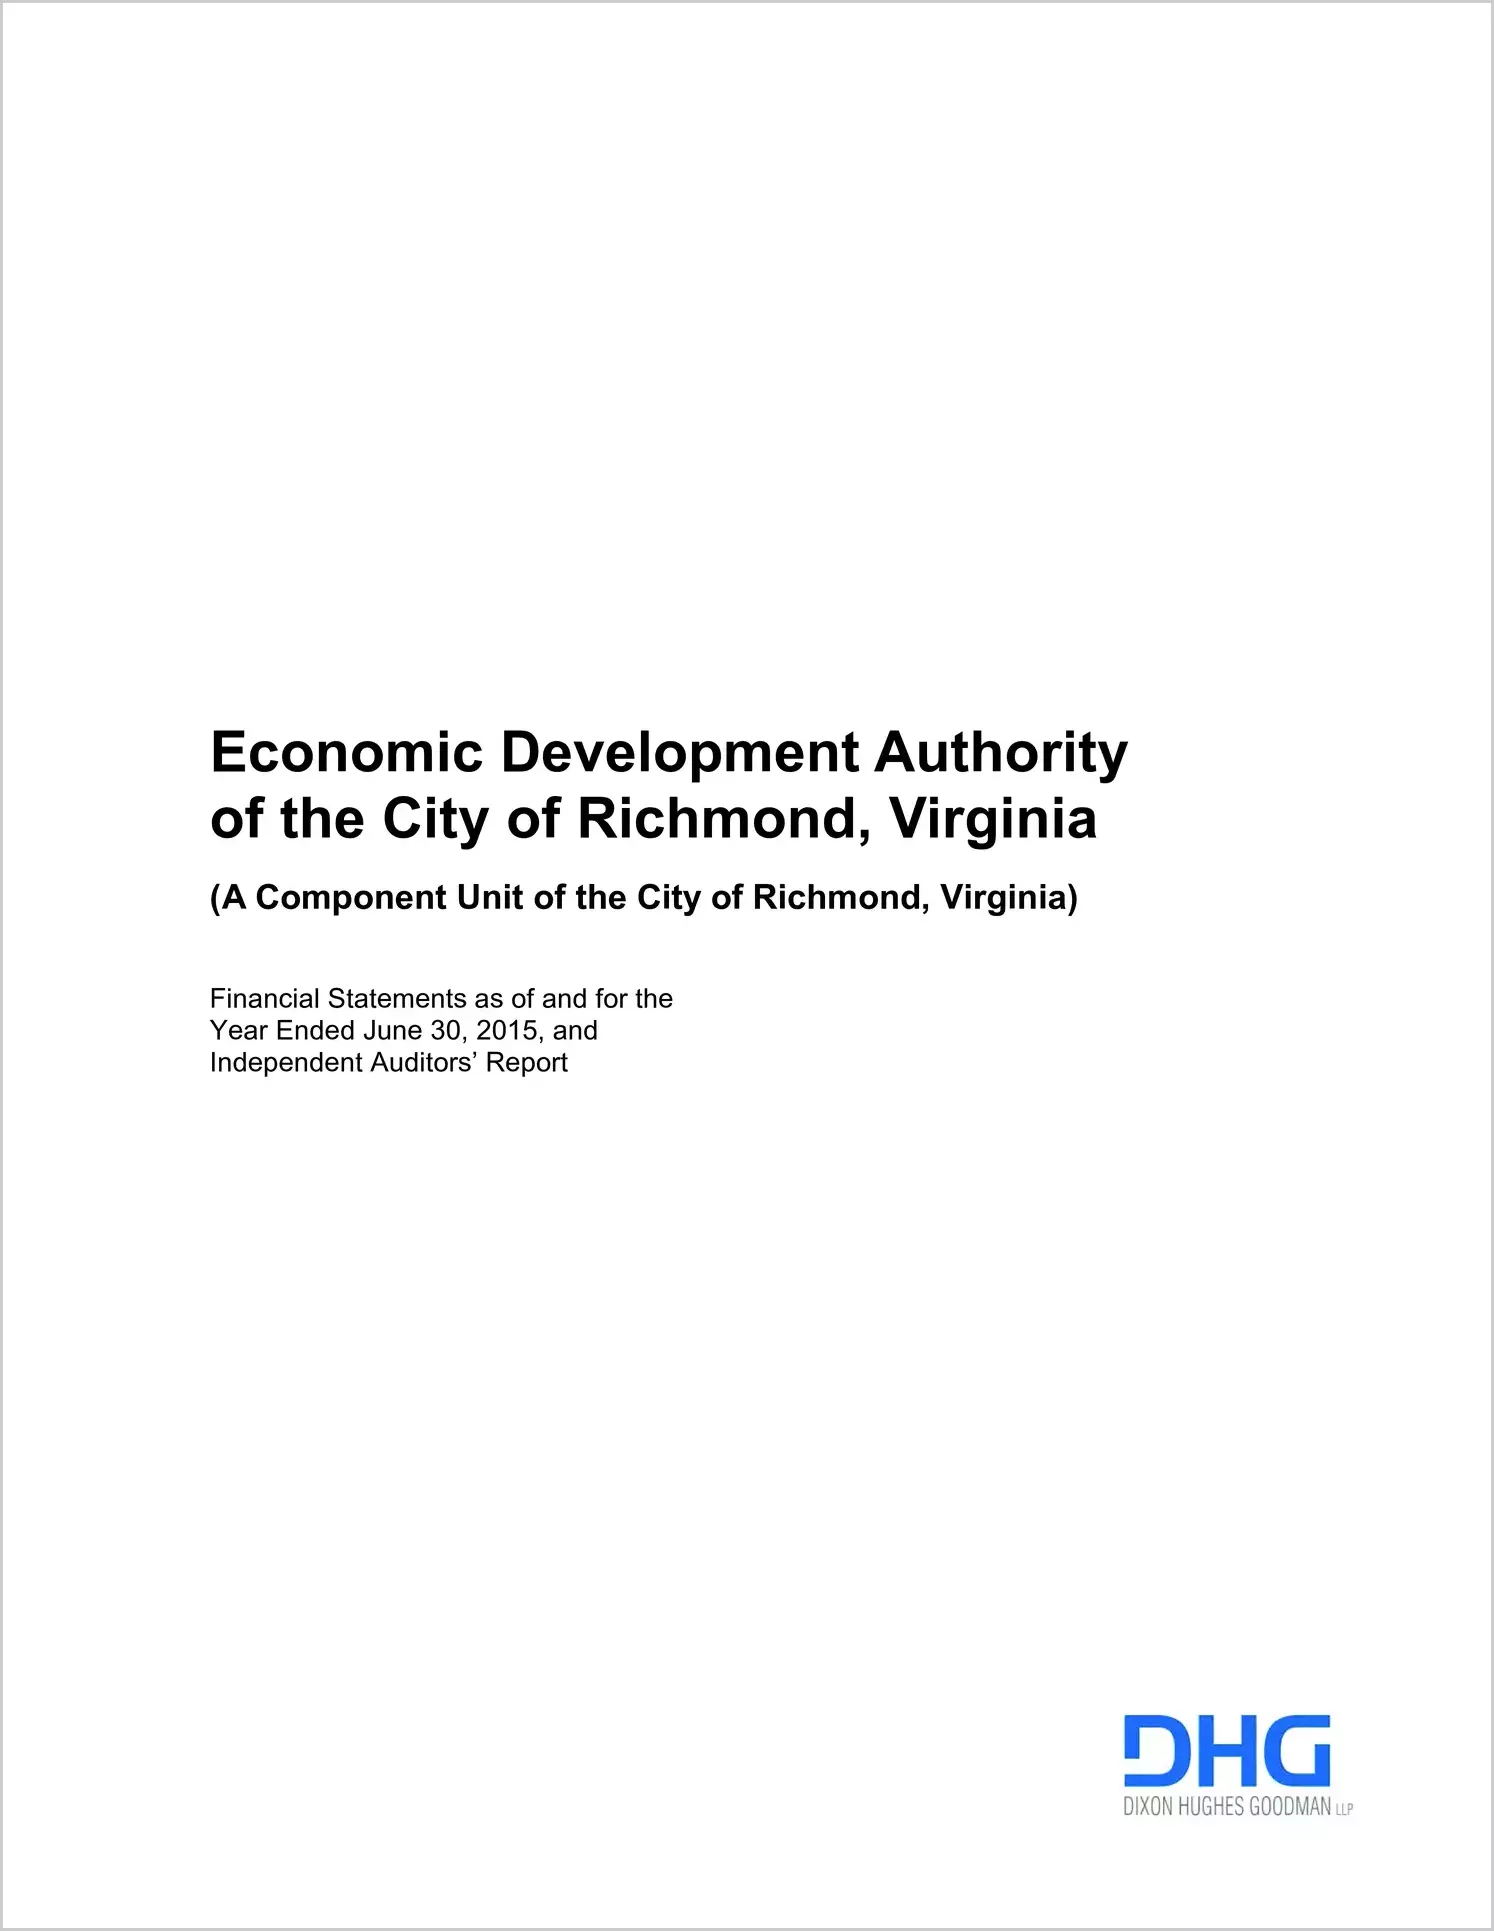 2015 ABC/Other Annual Financial Report  for Richmond City Economic Development Authority